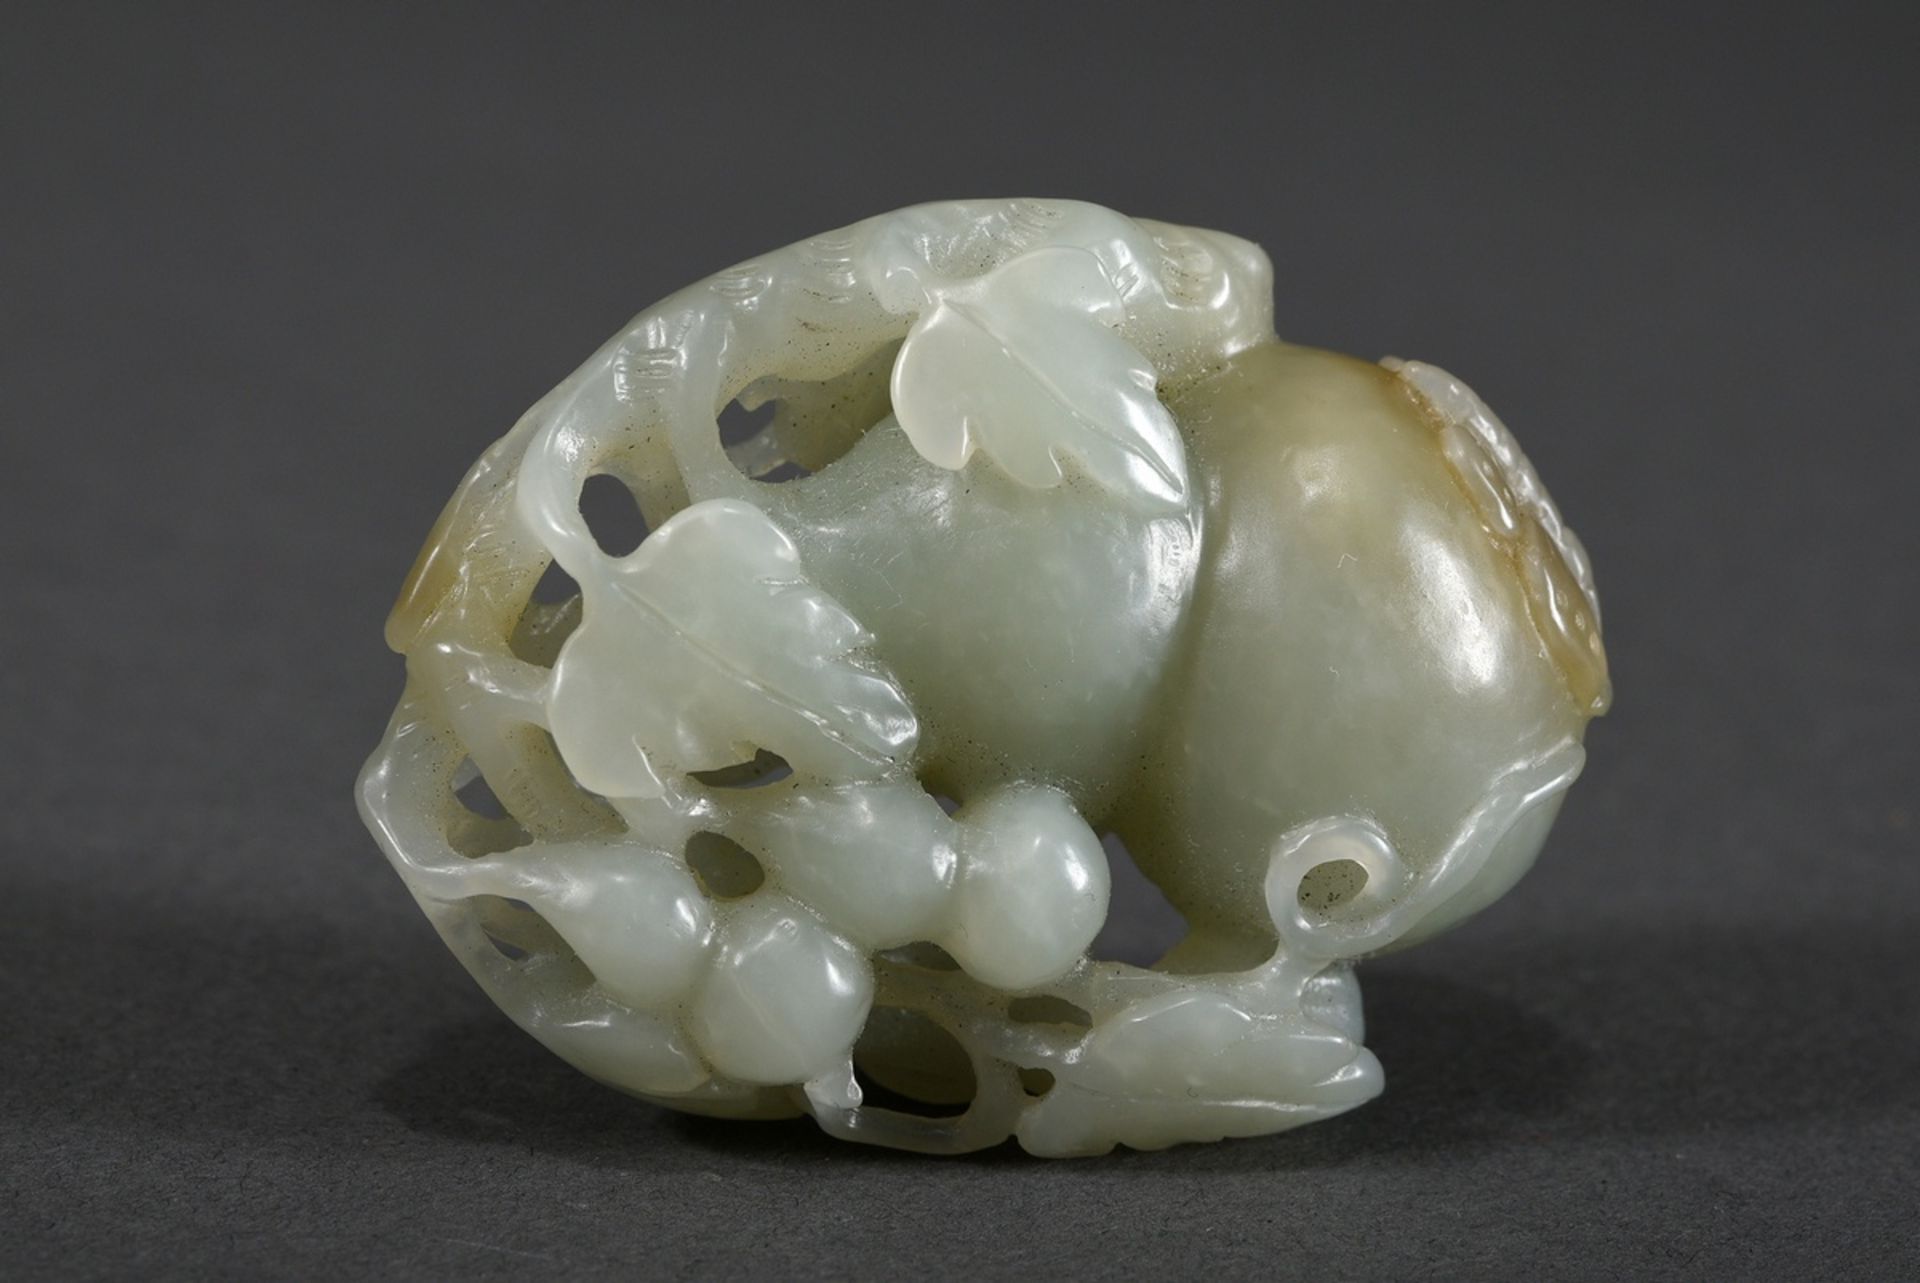 Bright jade toggle "Hulu gourds and butterfly", China, 6x4.2x1.8cm - Image 3 of 5